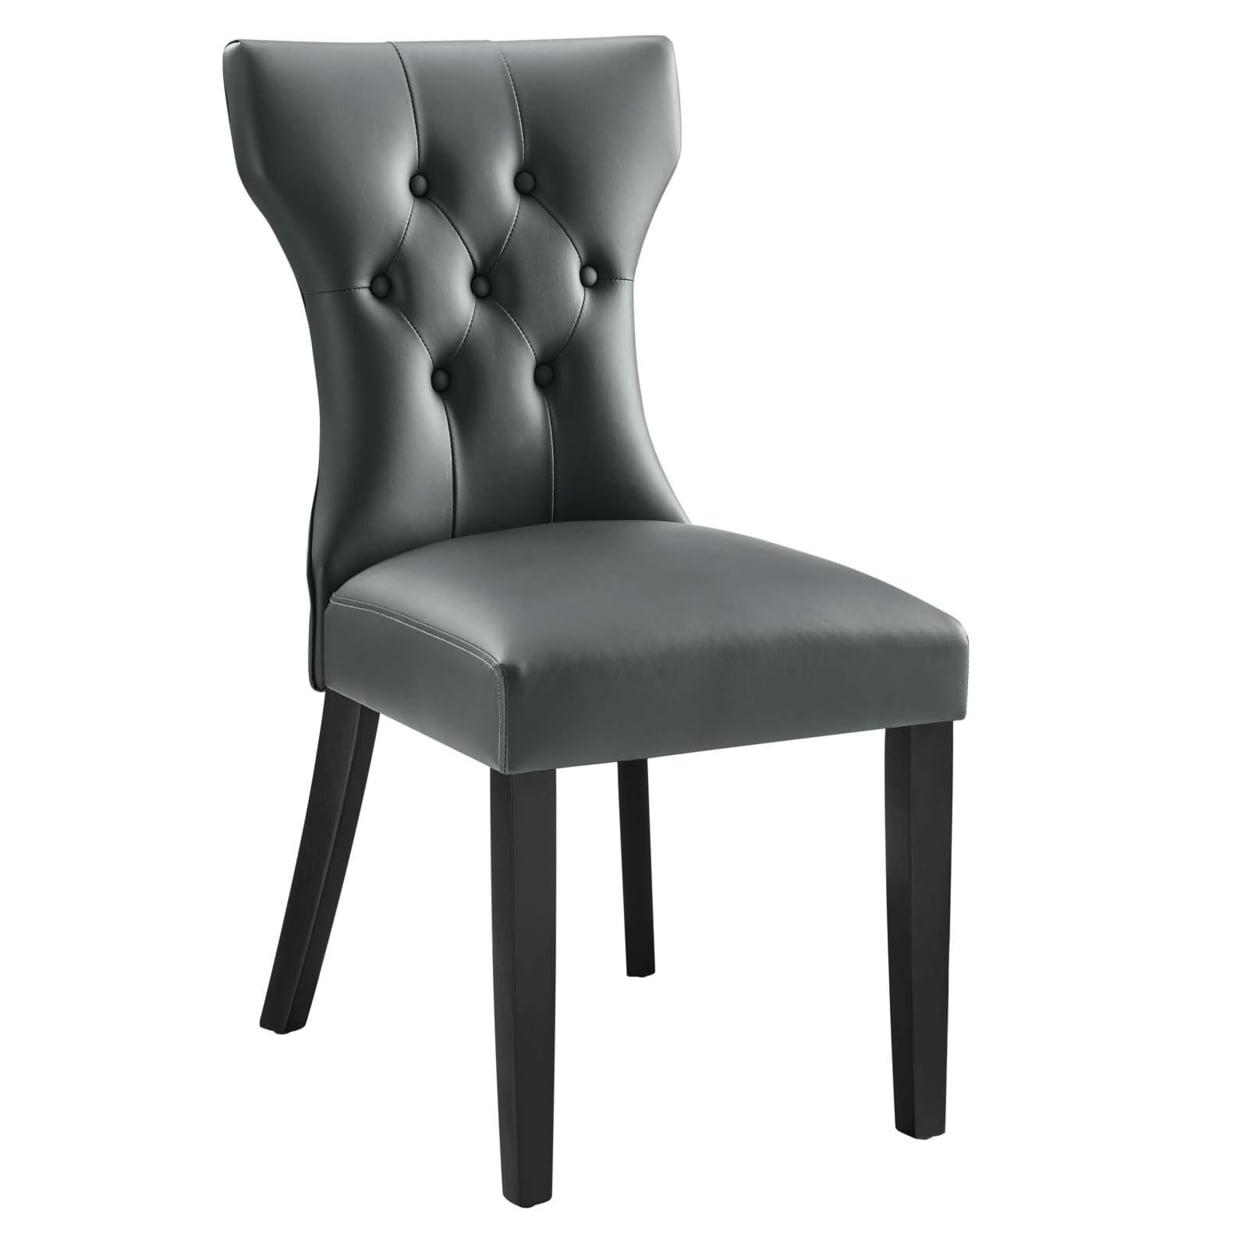 Luxurious Gray Faux Leather Hourglass Side Chair with Hardwood Legs